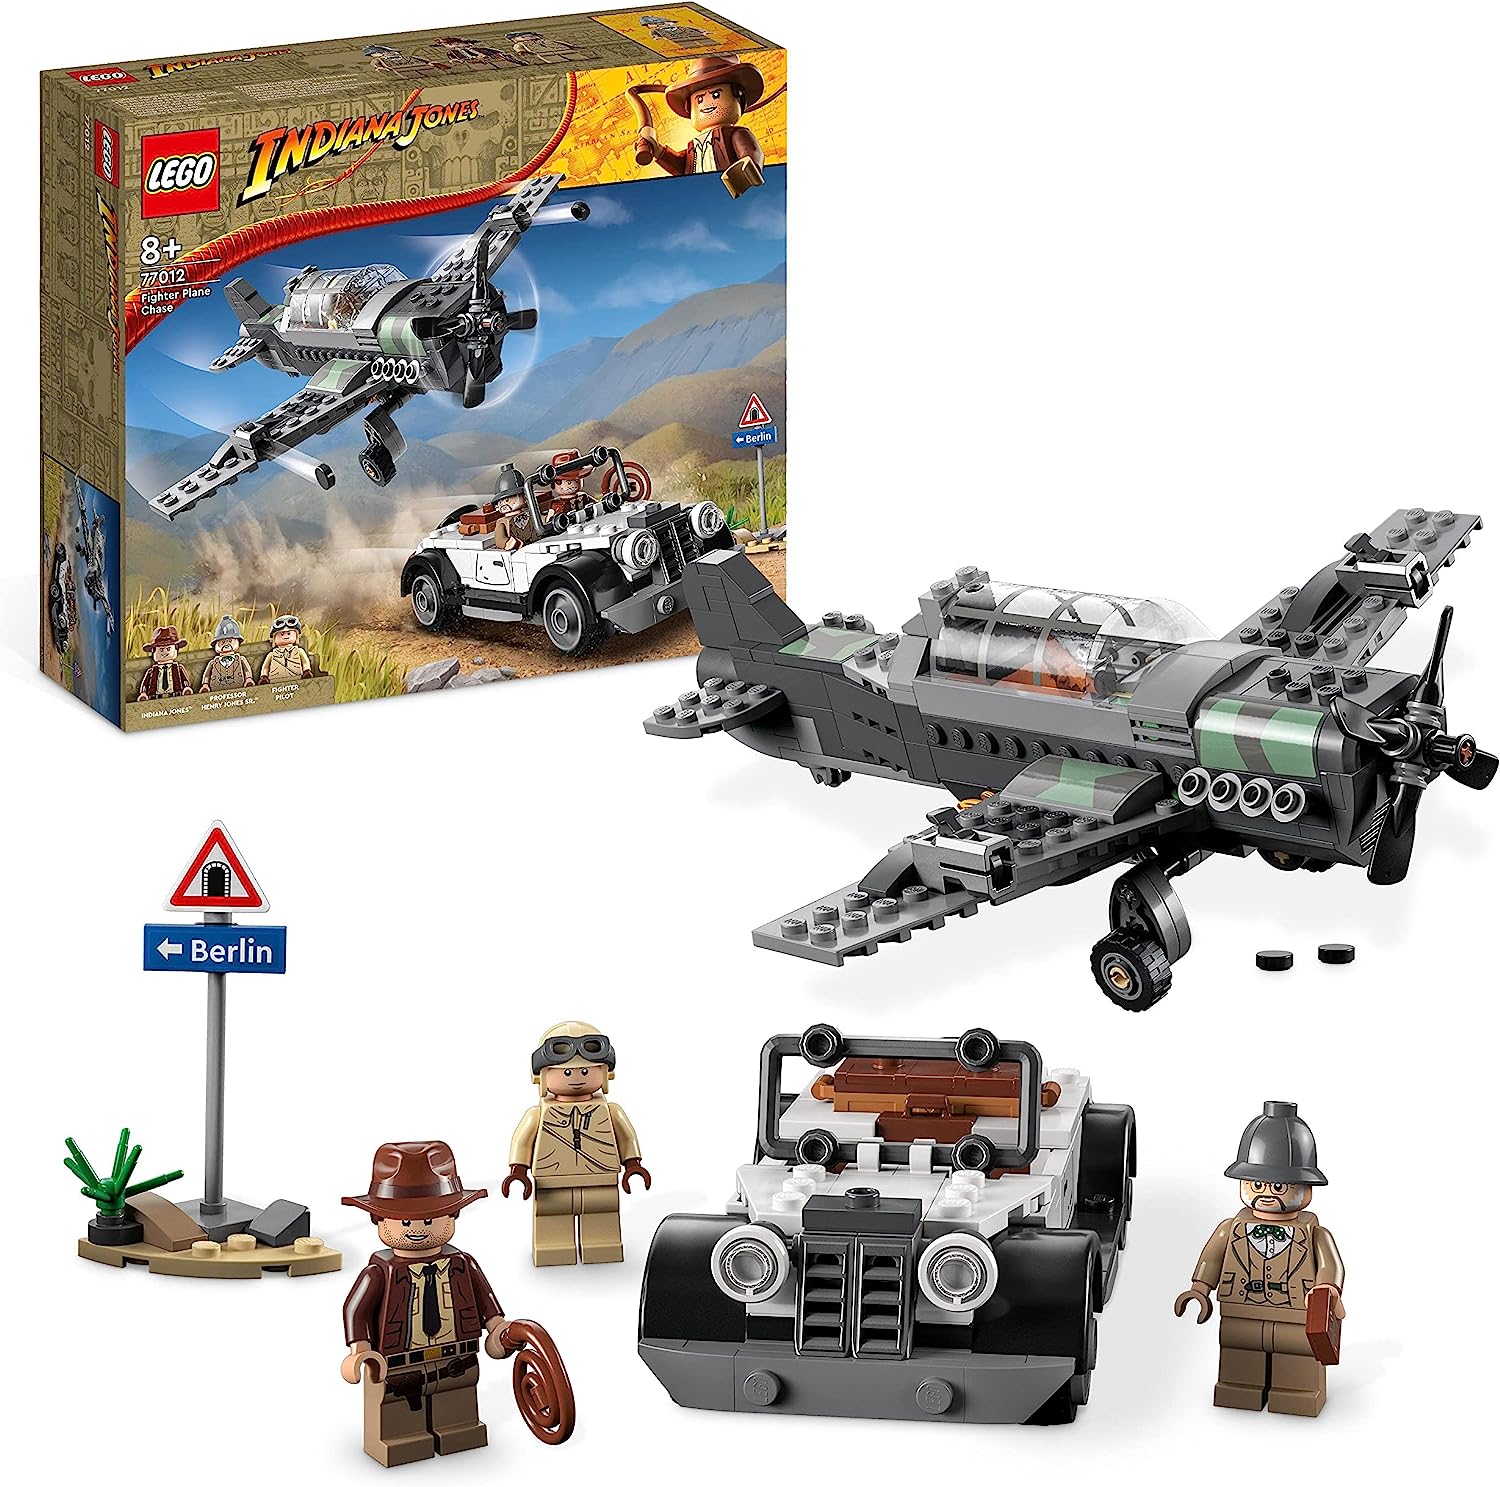 LEGO 77012 Indiana Jones Escape from Hunting Plane Action Set with Buildable Aeroplane Model and Vintage Car Toy Car, Plus 3 Mini Figures, The Last Crusade Movie